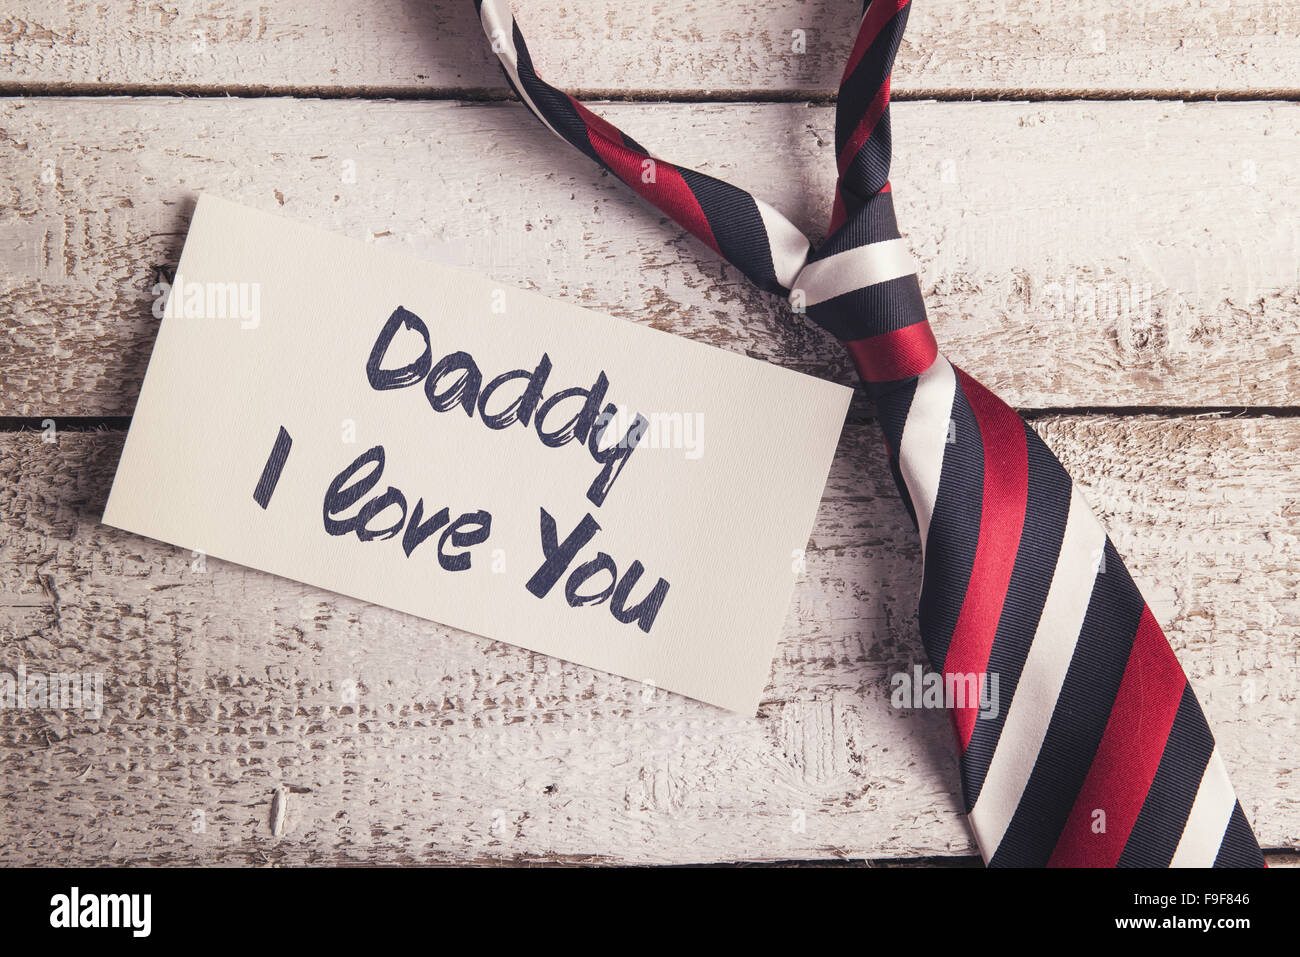 Daddy I love you sign on paper and colorful tie laid on wooden floor backround. Stock Photo